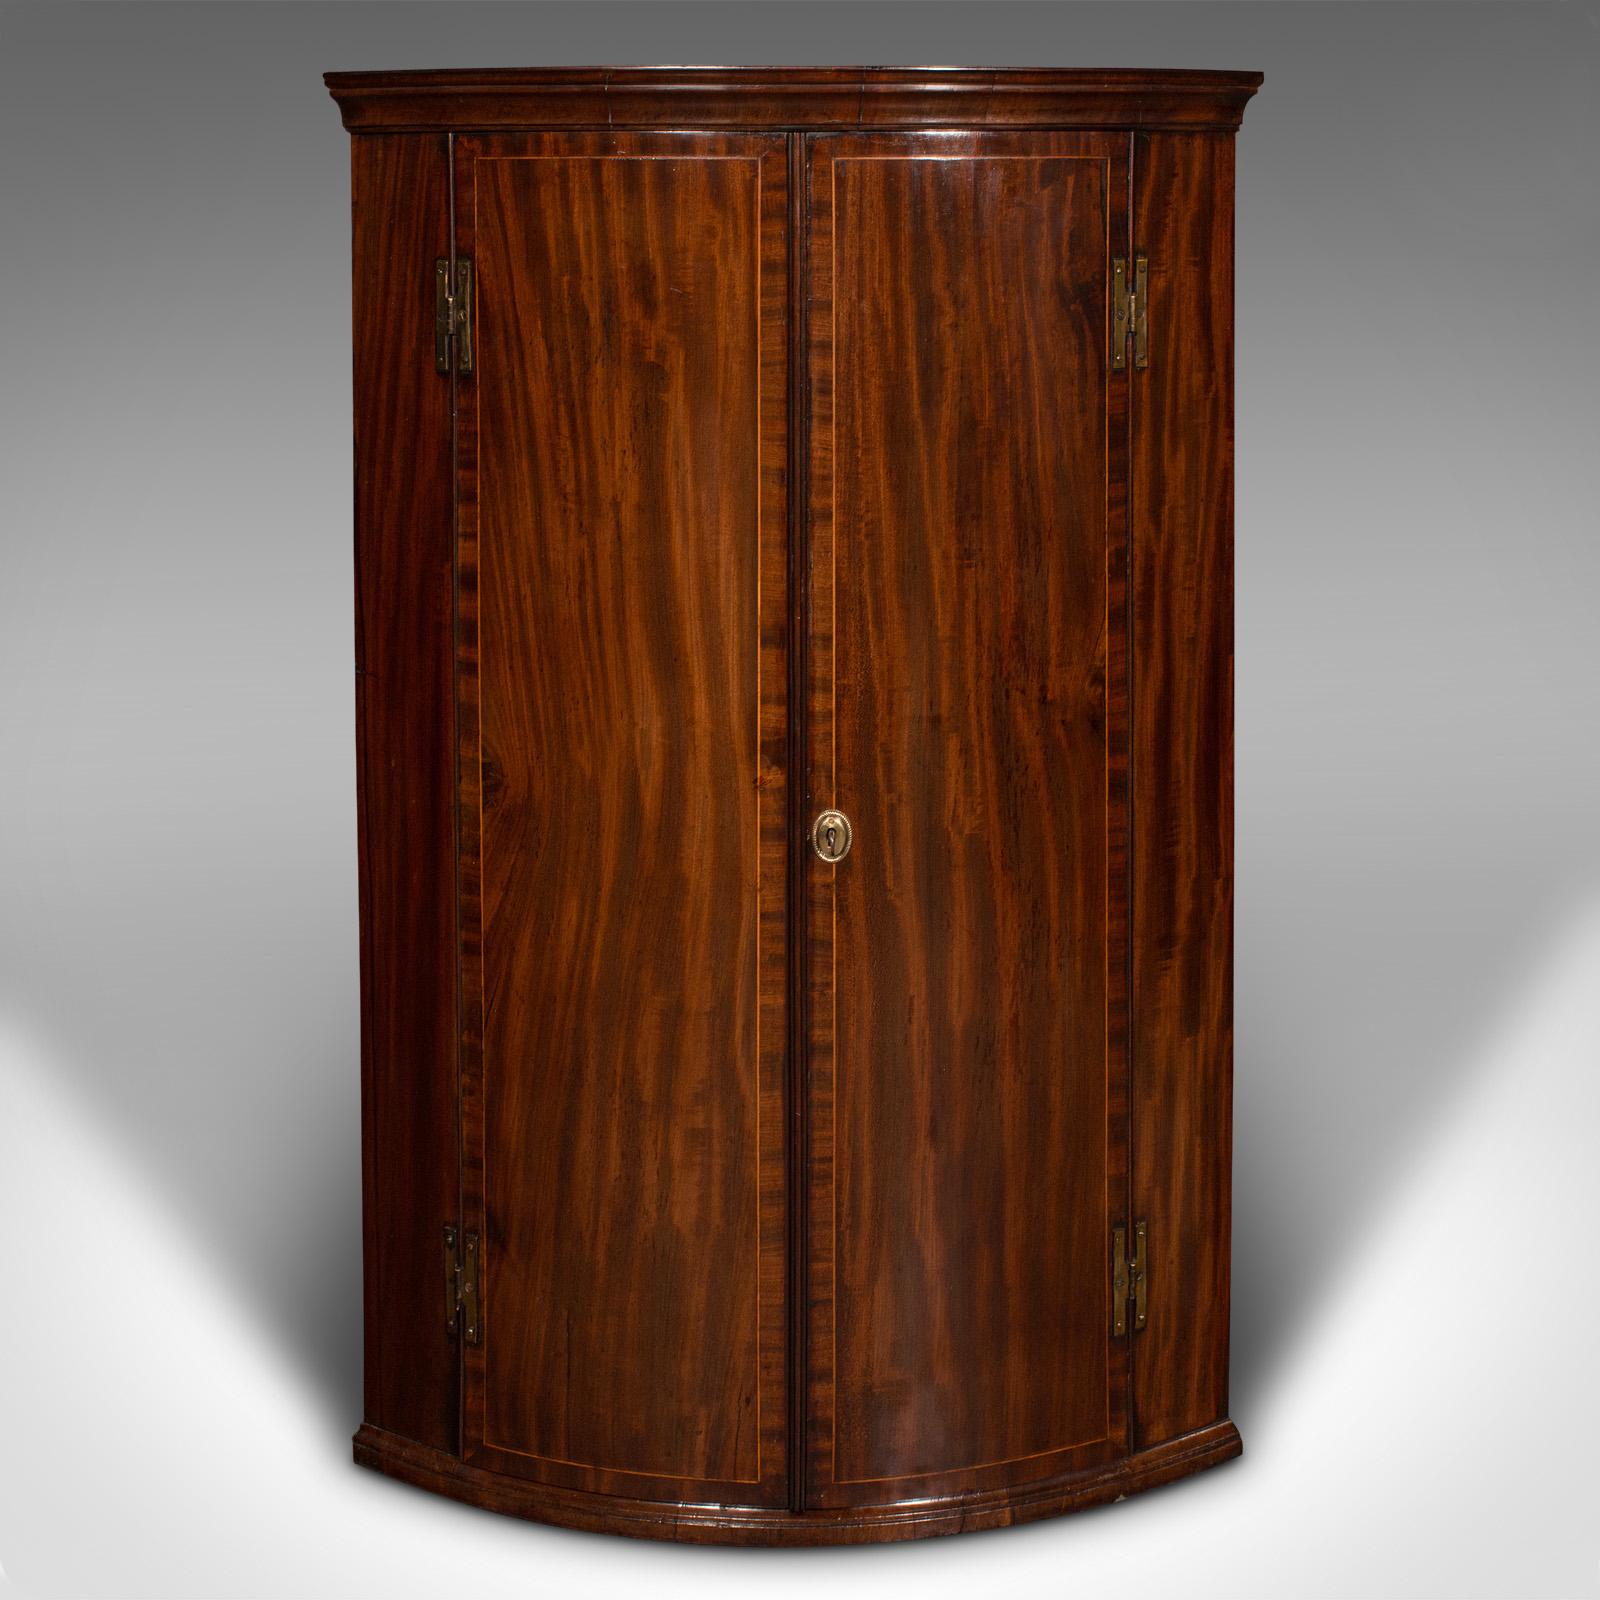 This is an antique corner cabinet. An English, mahogany and oak bow front wall cupboard, dating to the Georgian period, circa 1780.

A fine example of Georgian craftsmanship, with delightful figuring
Displays a desirable aged patina and in good